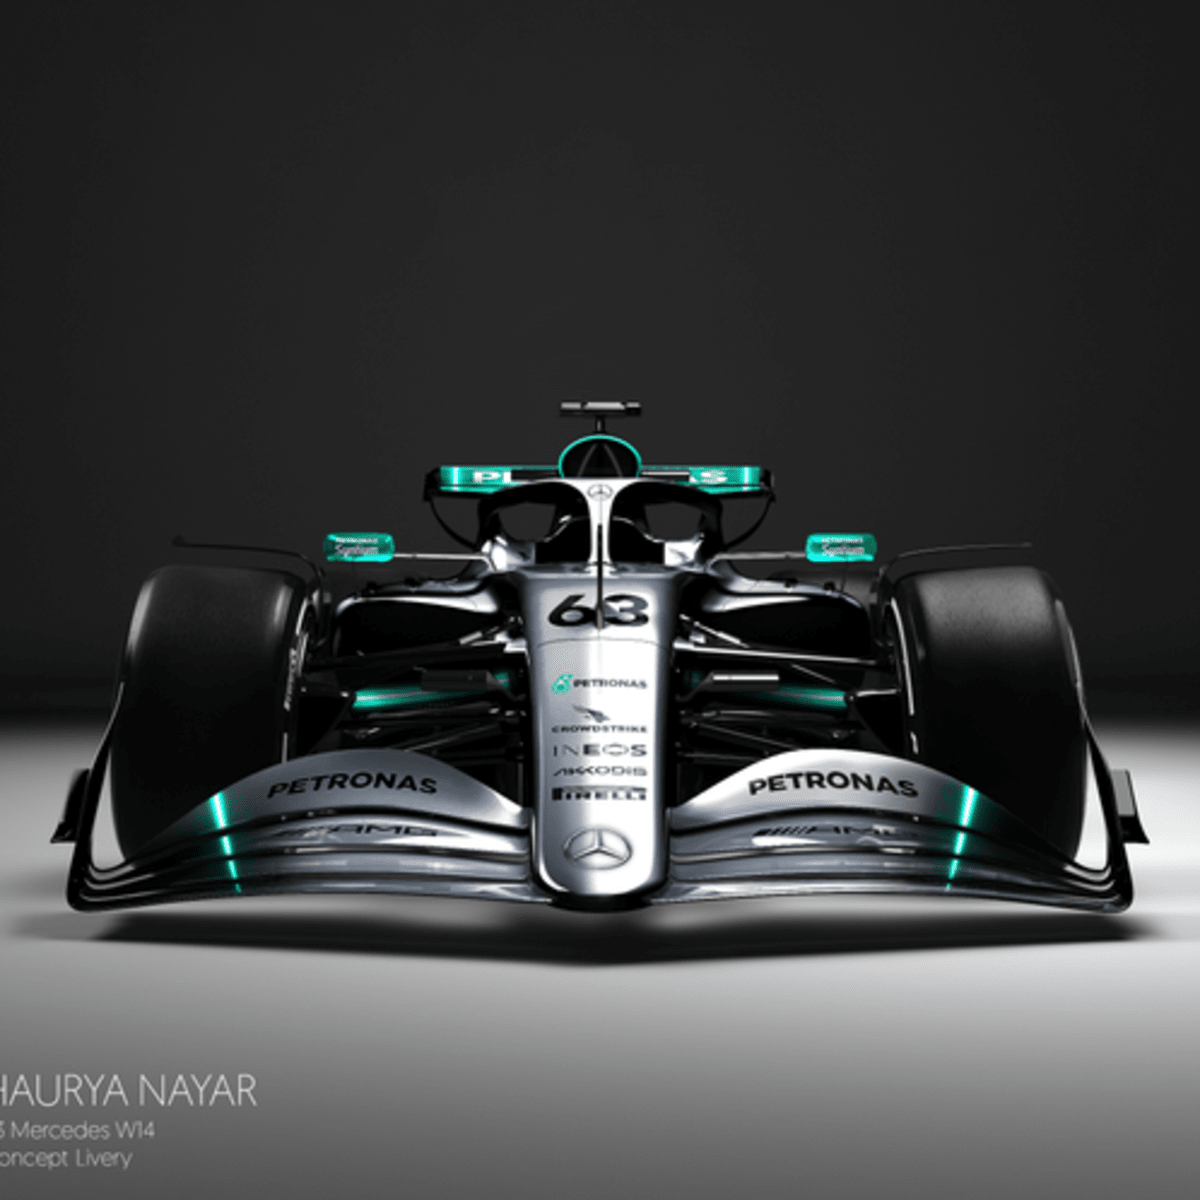 F1 News: Mercedes 14 Livery Imagined by Fans Ahead of 2023 Season Briefings: Formula 1 News, Rumors, Standings and More